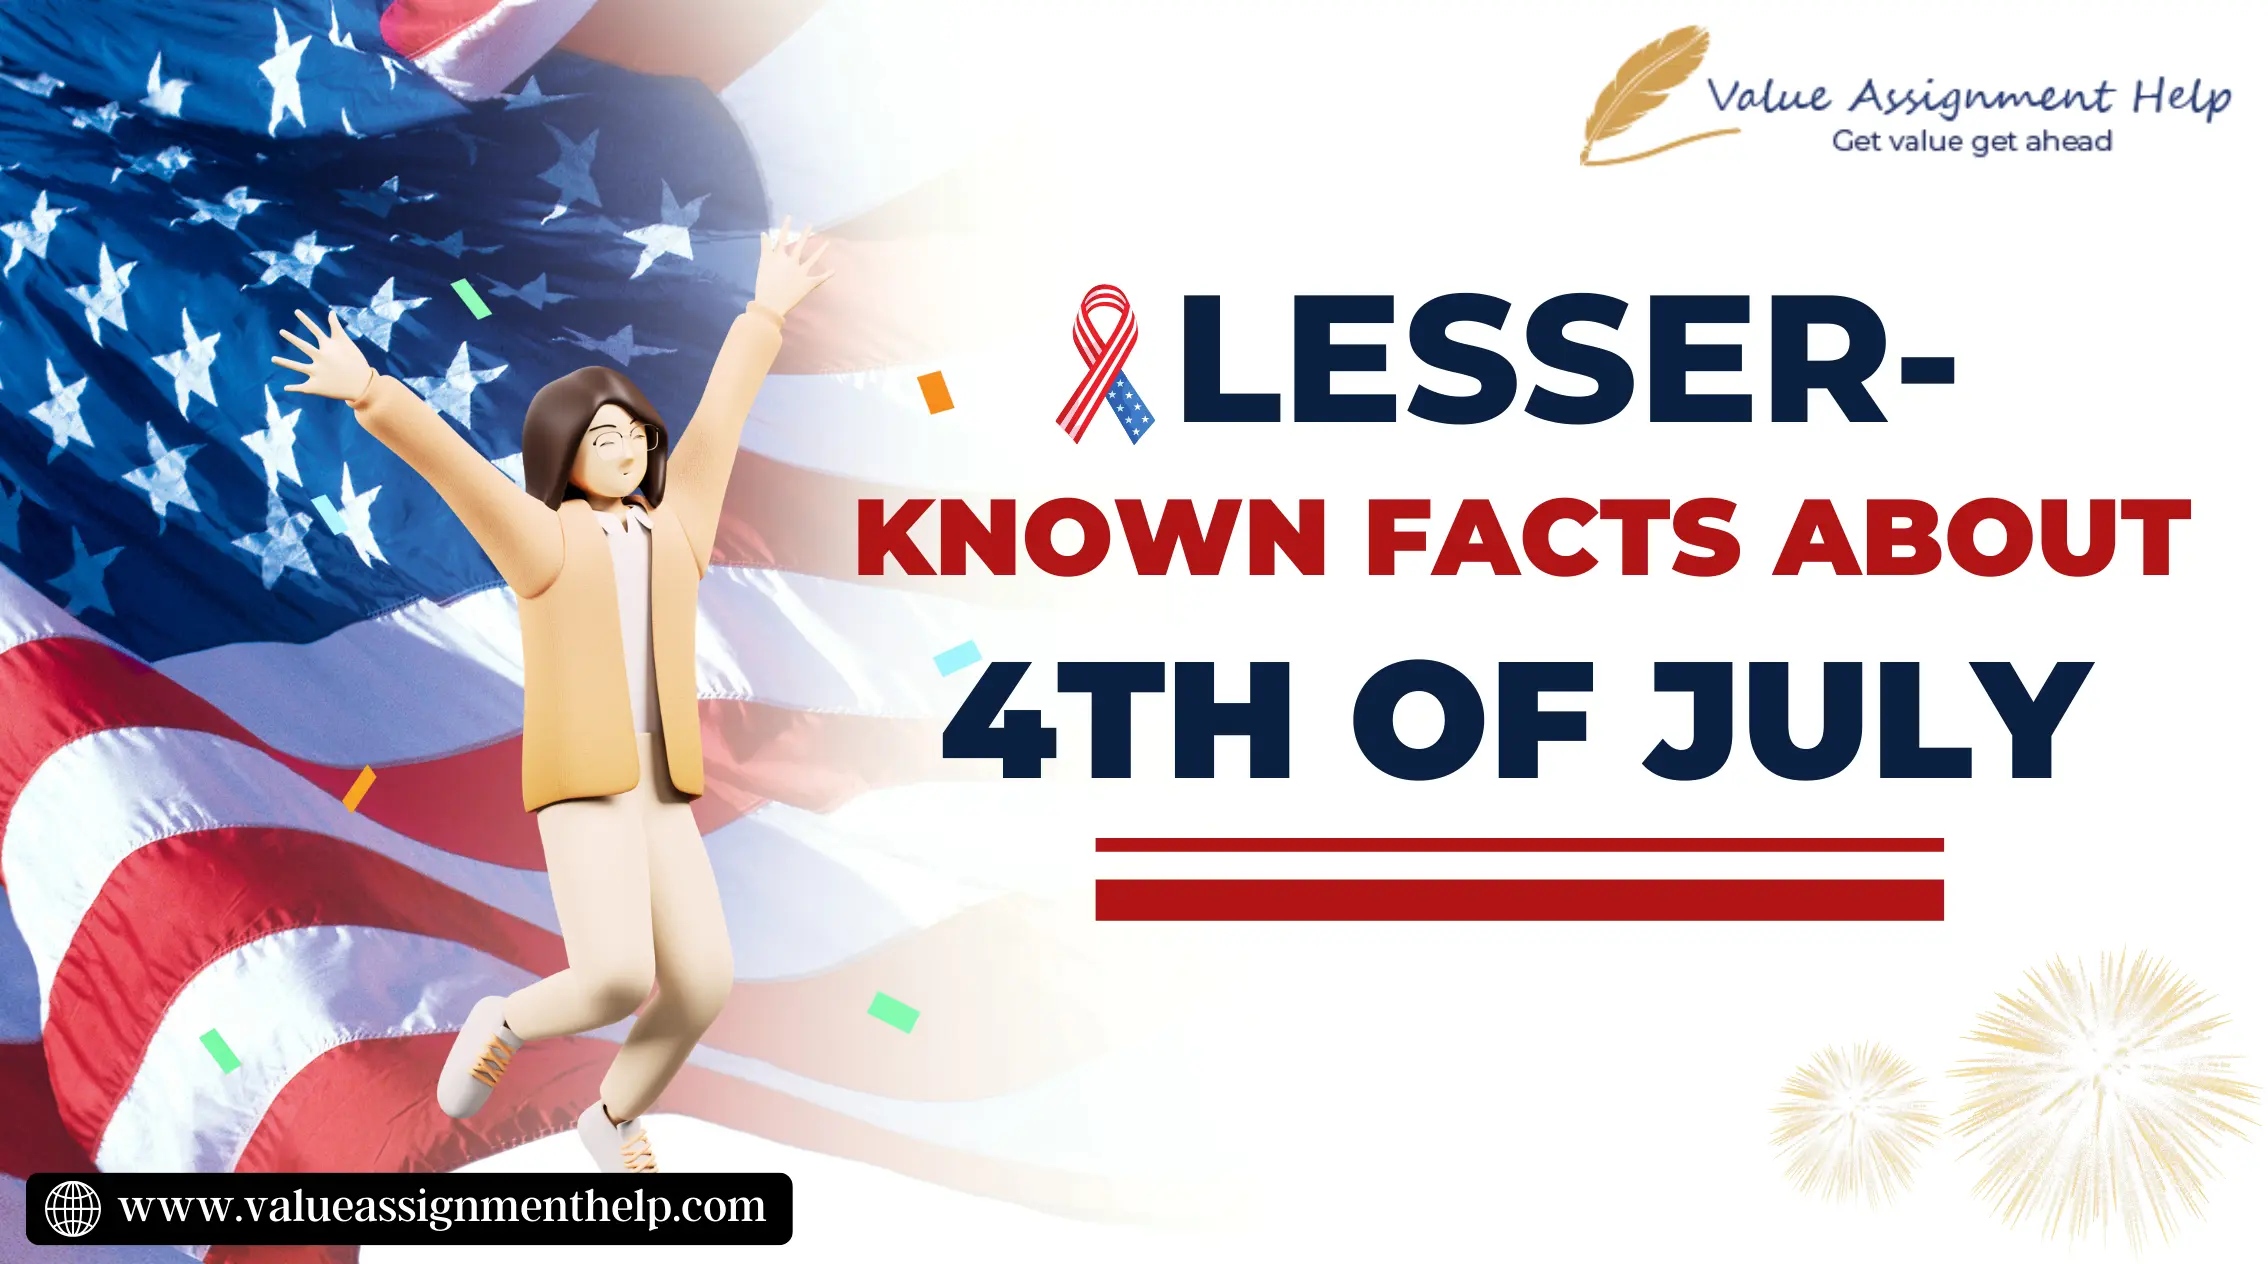  Lesser-known facts about 4th of July